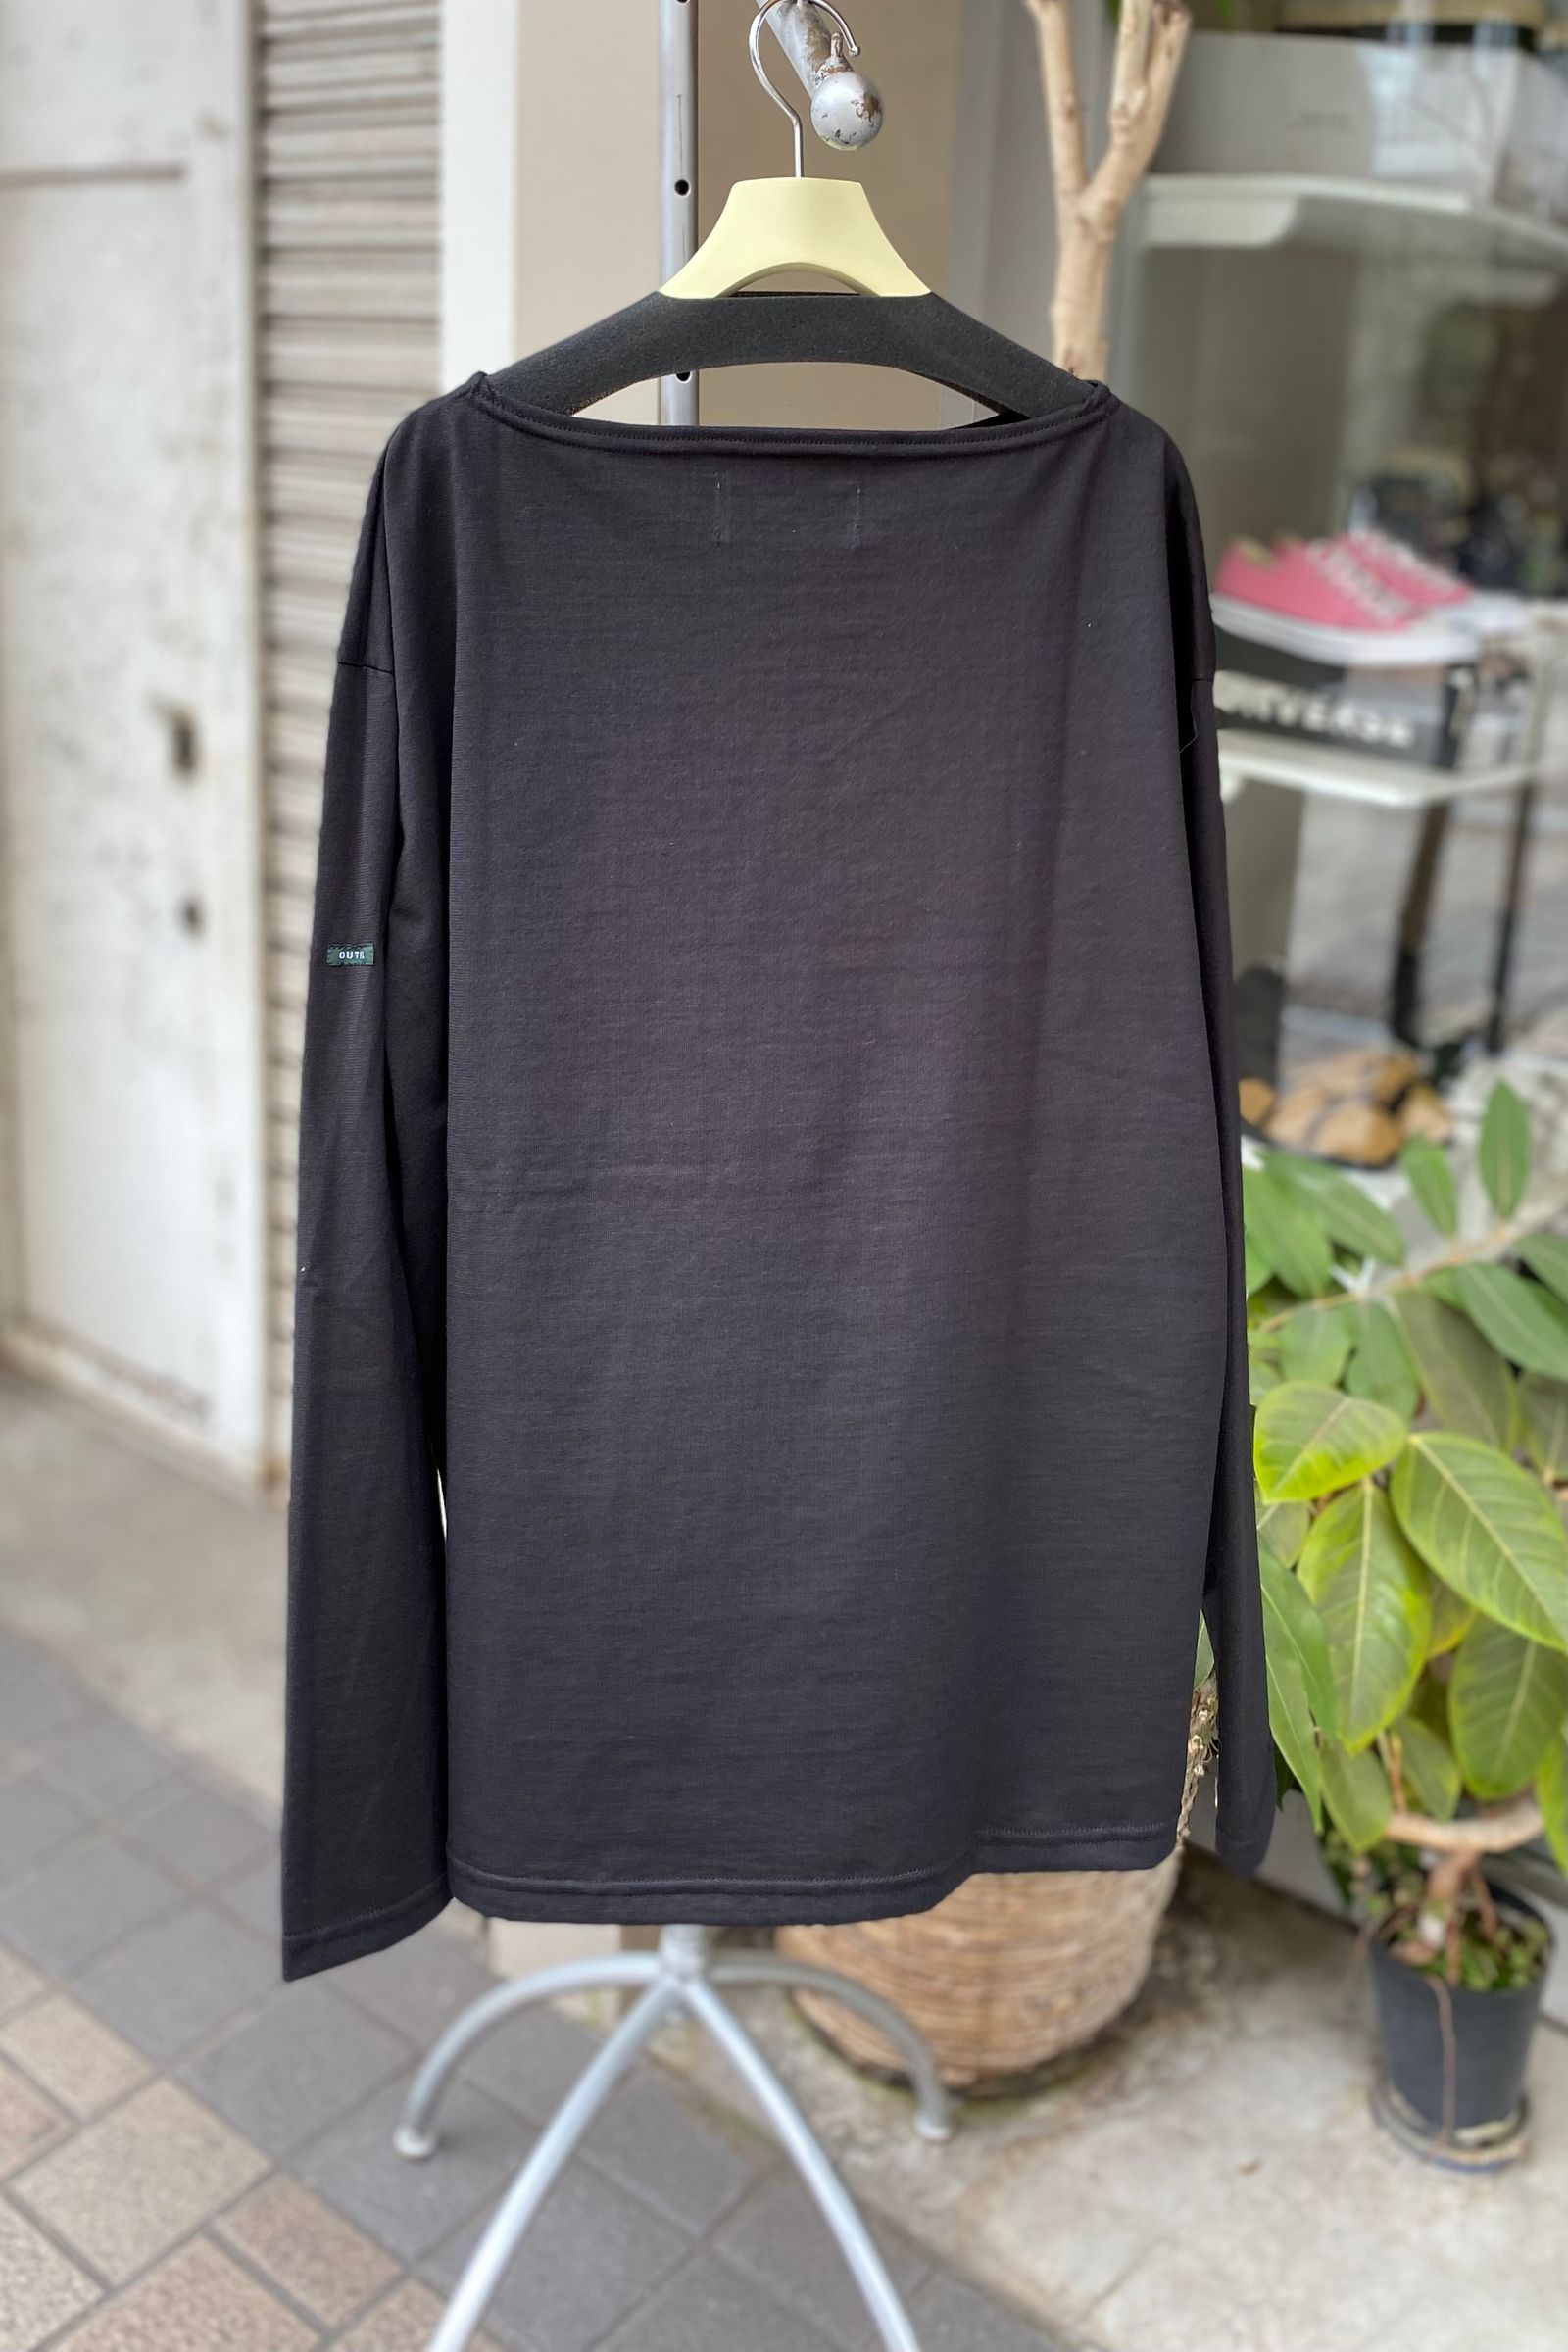 OUTIL - バスクシャツ/tricot aast -black- 23ss unisex | asterisk